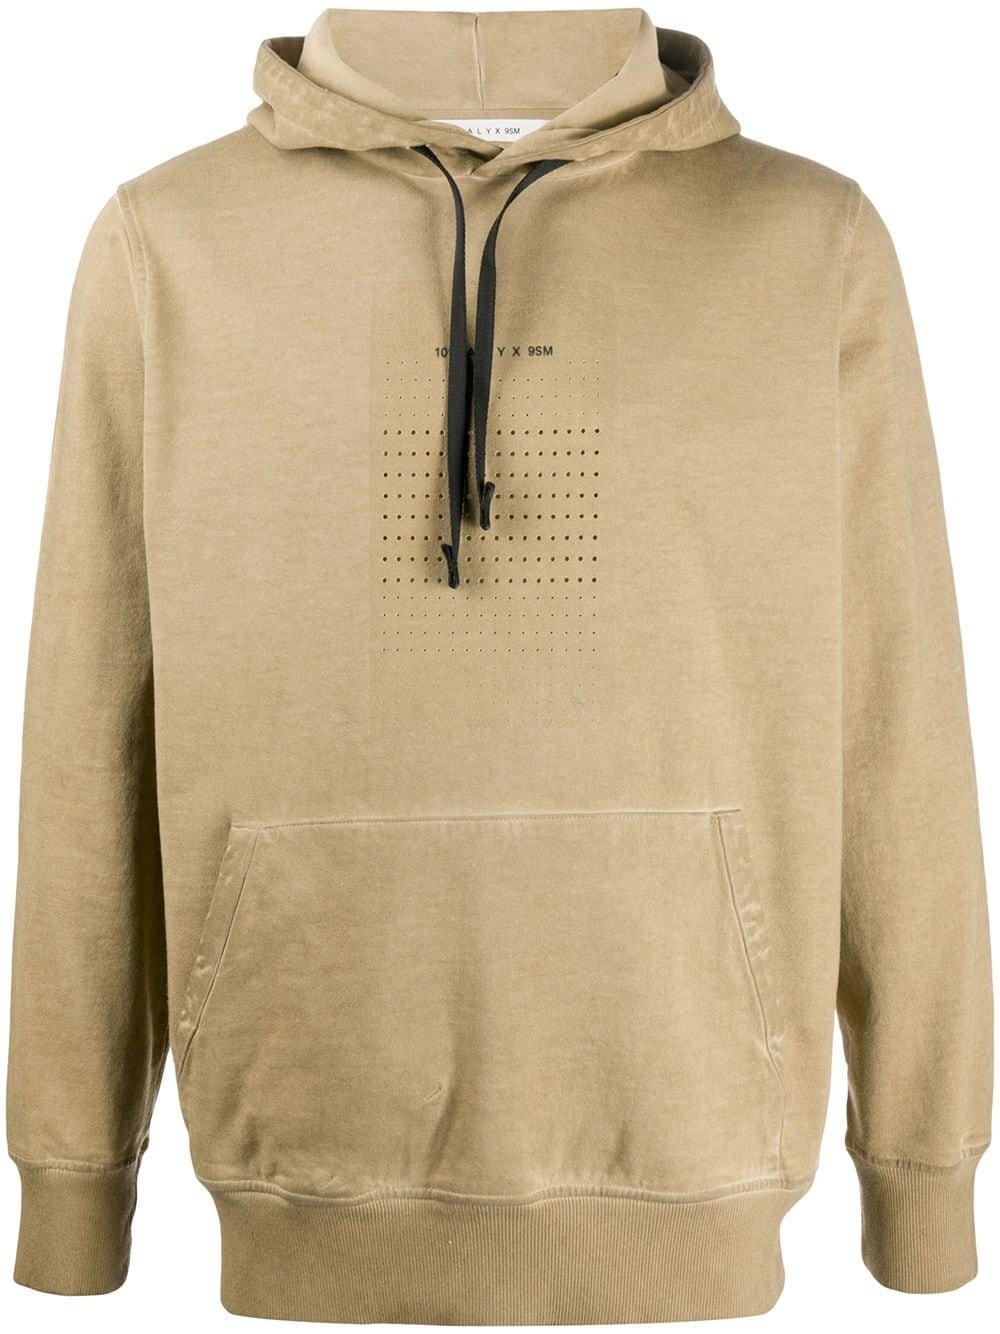 1017 ALYX 9SM Cotton Printed Hoodie in Natural for Men - Lyst